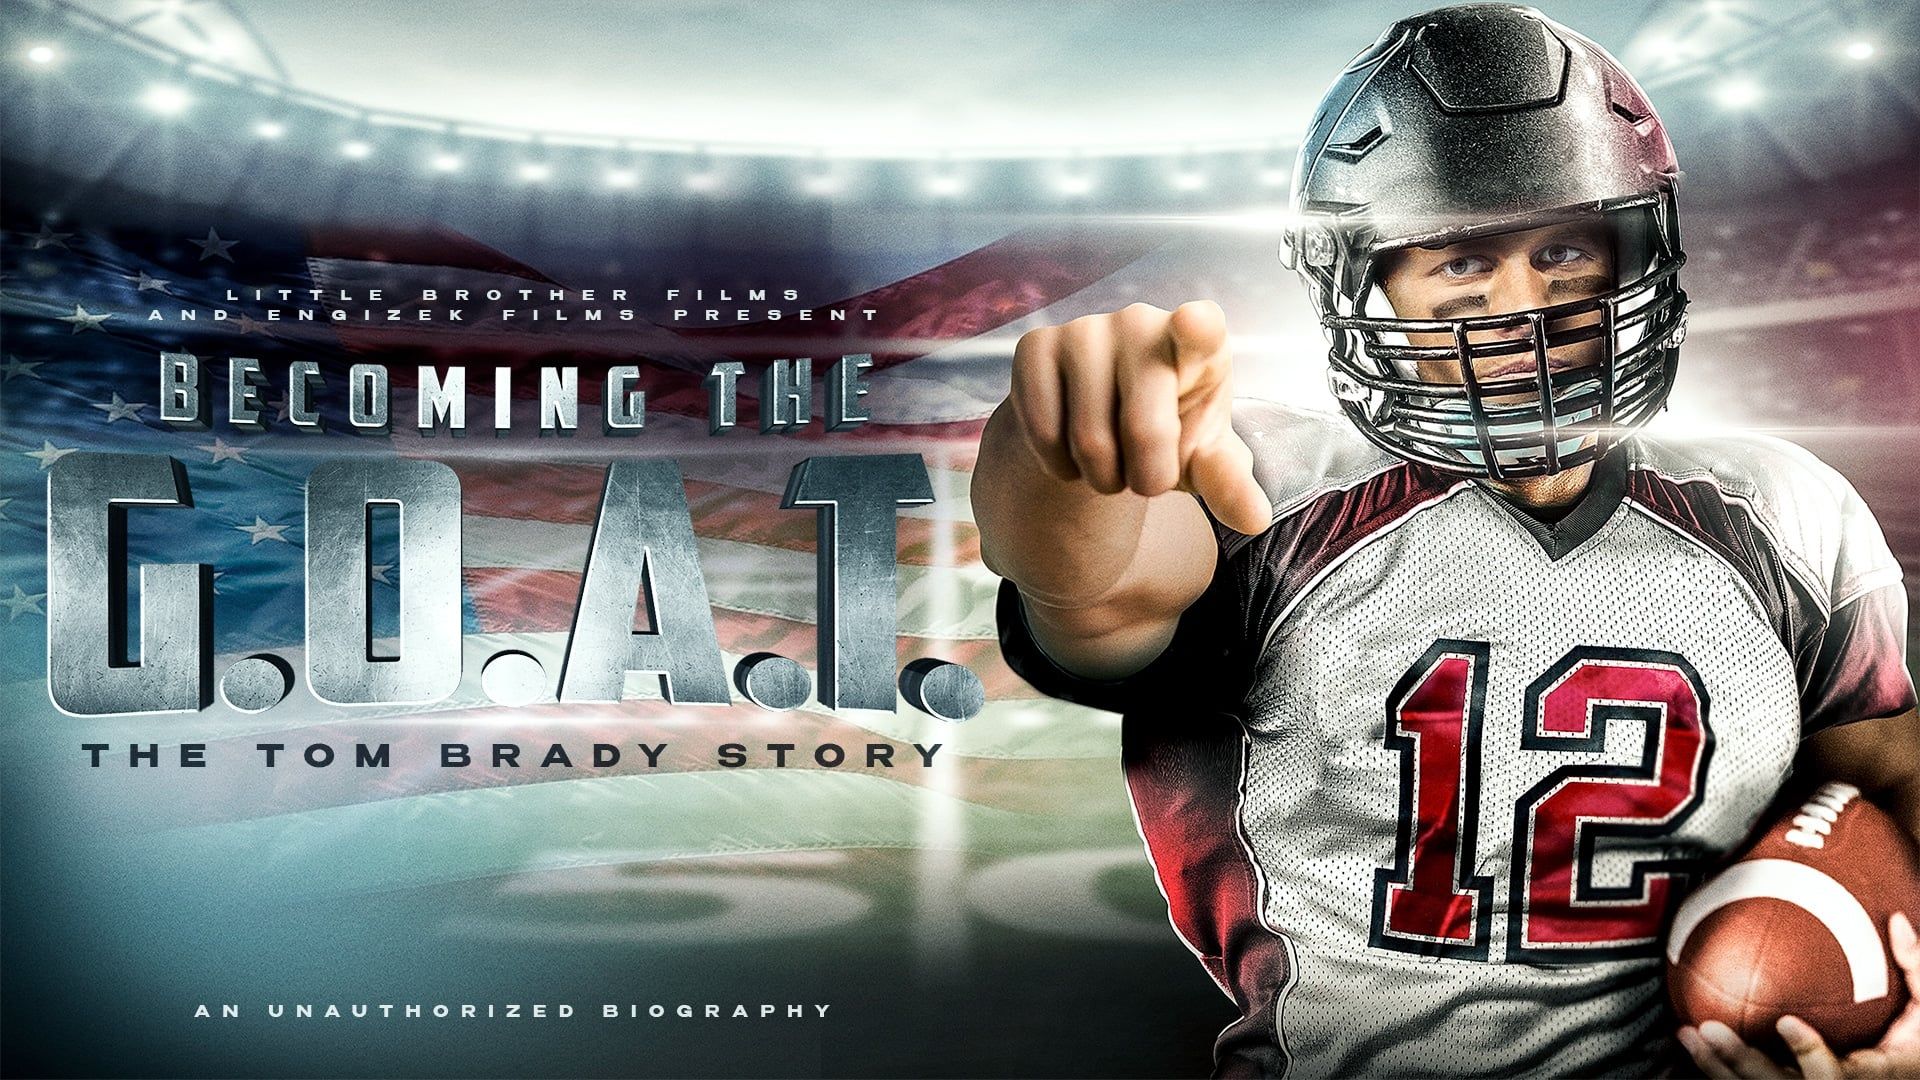 Becoming the G.O.A.T.: The Tom Brady Story background